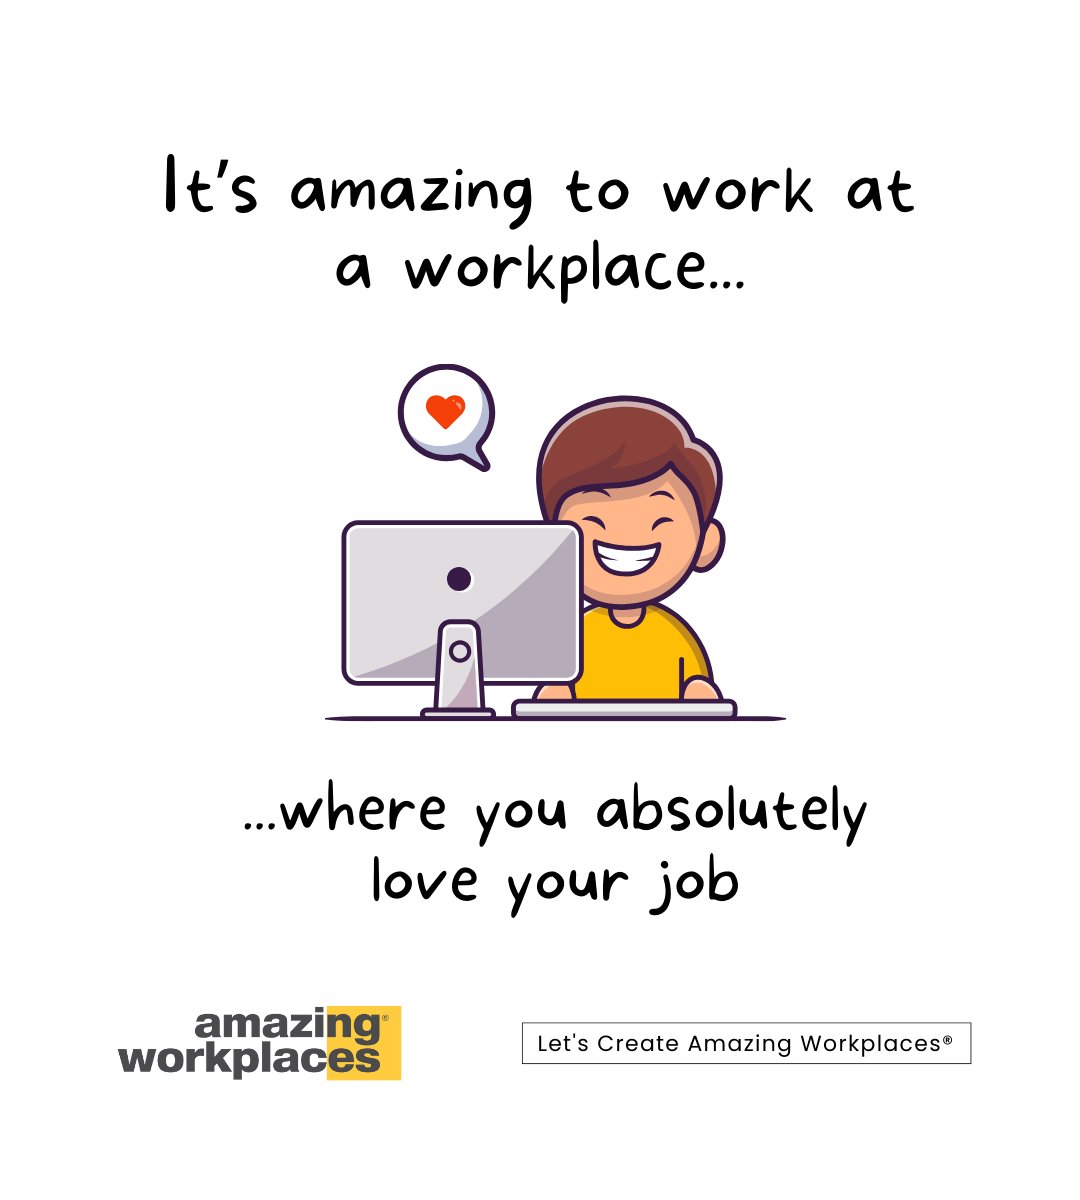 If you've found a workplace where you're surrounded by supportive people, doing work that's meaningful to you, and making a difference, cherish it. It's a gift.🌟

#culture #workplaceculture #grateful #gratitude #happyemployees #amazingworkplaces #letscreateamazingworkplaces